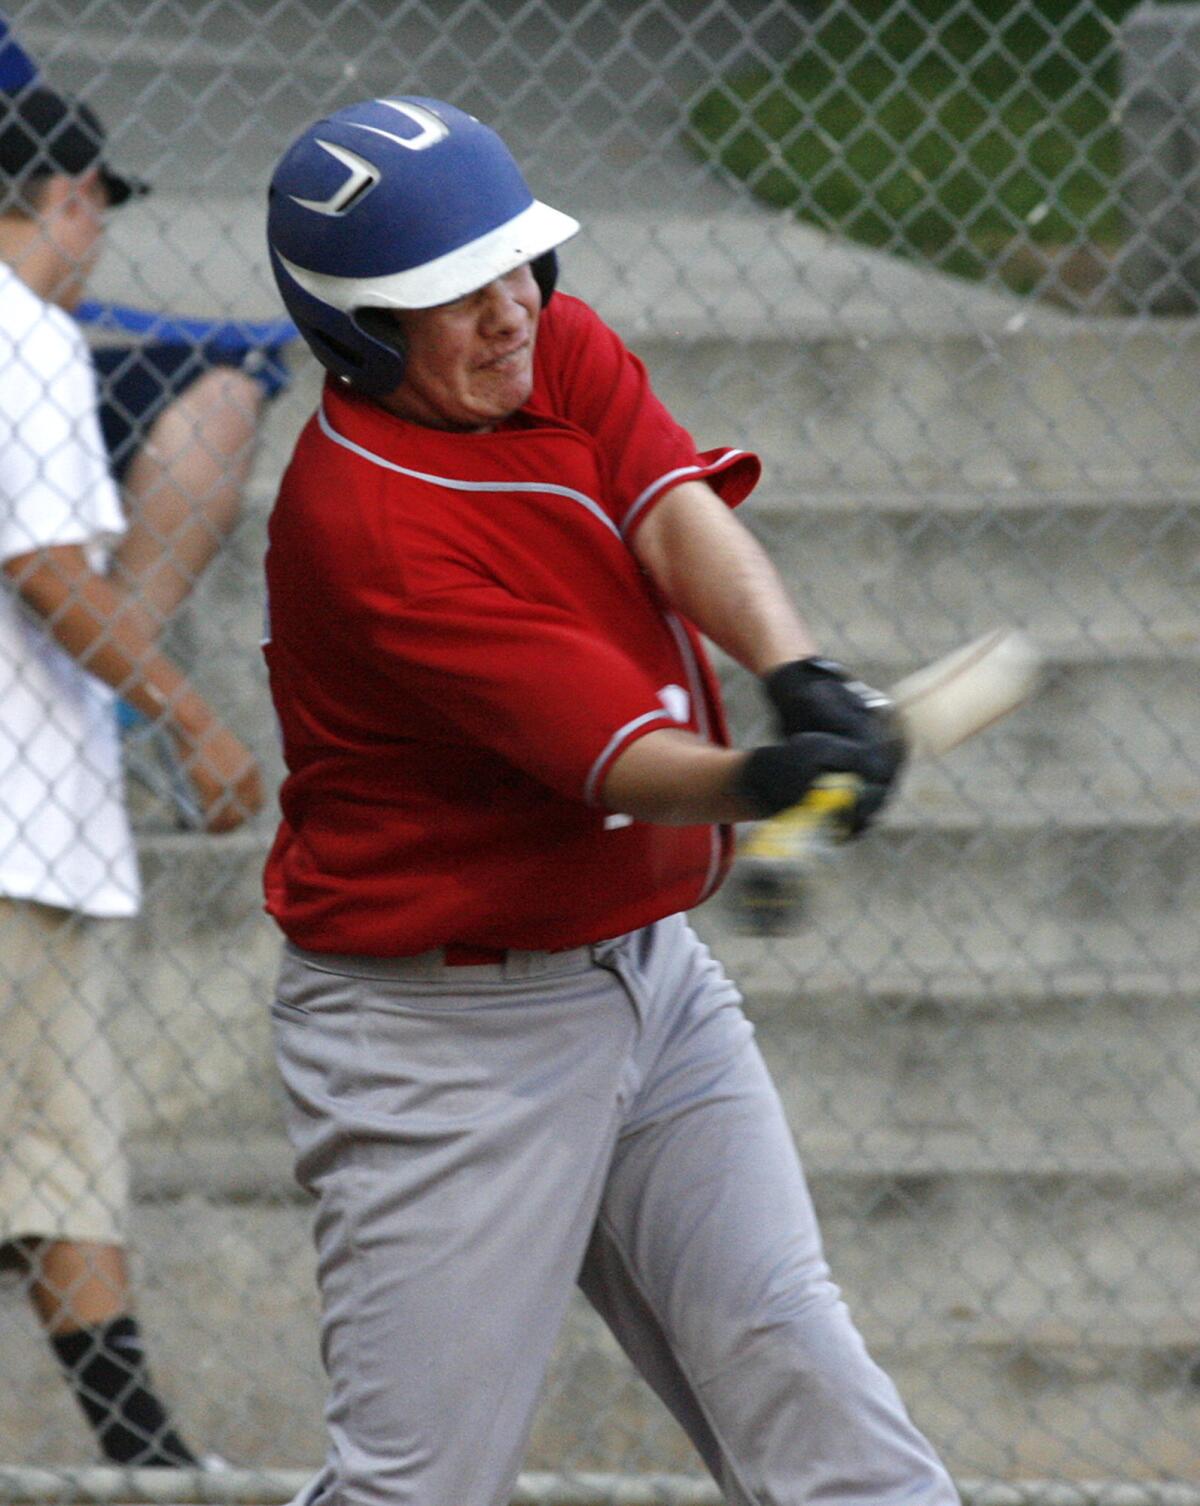 File Photo: La Crescenta's Sean Holt led off with a walk and scored two outs later on a single to center by Zander Ladd on Monday, July 29, 2013. The local 14-year-old Babe Ruth squad surrendered its lead and couldn't recover due to mistakes in 11-1 loss.